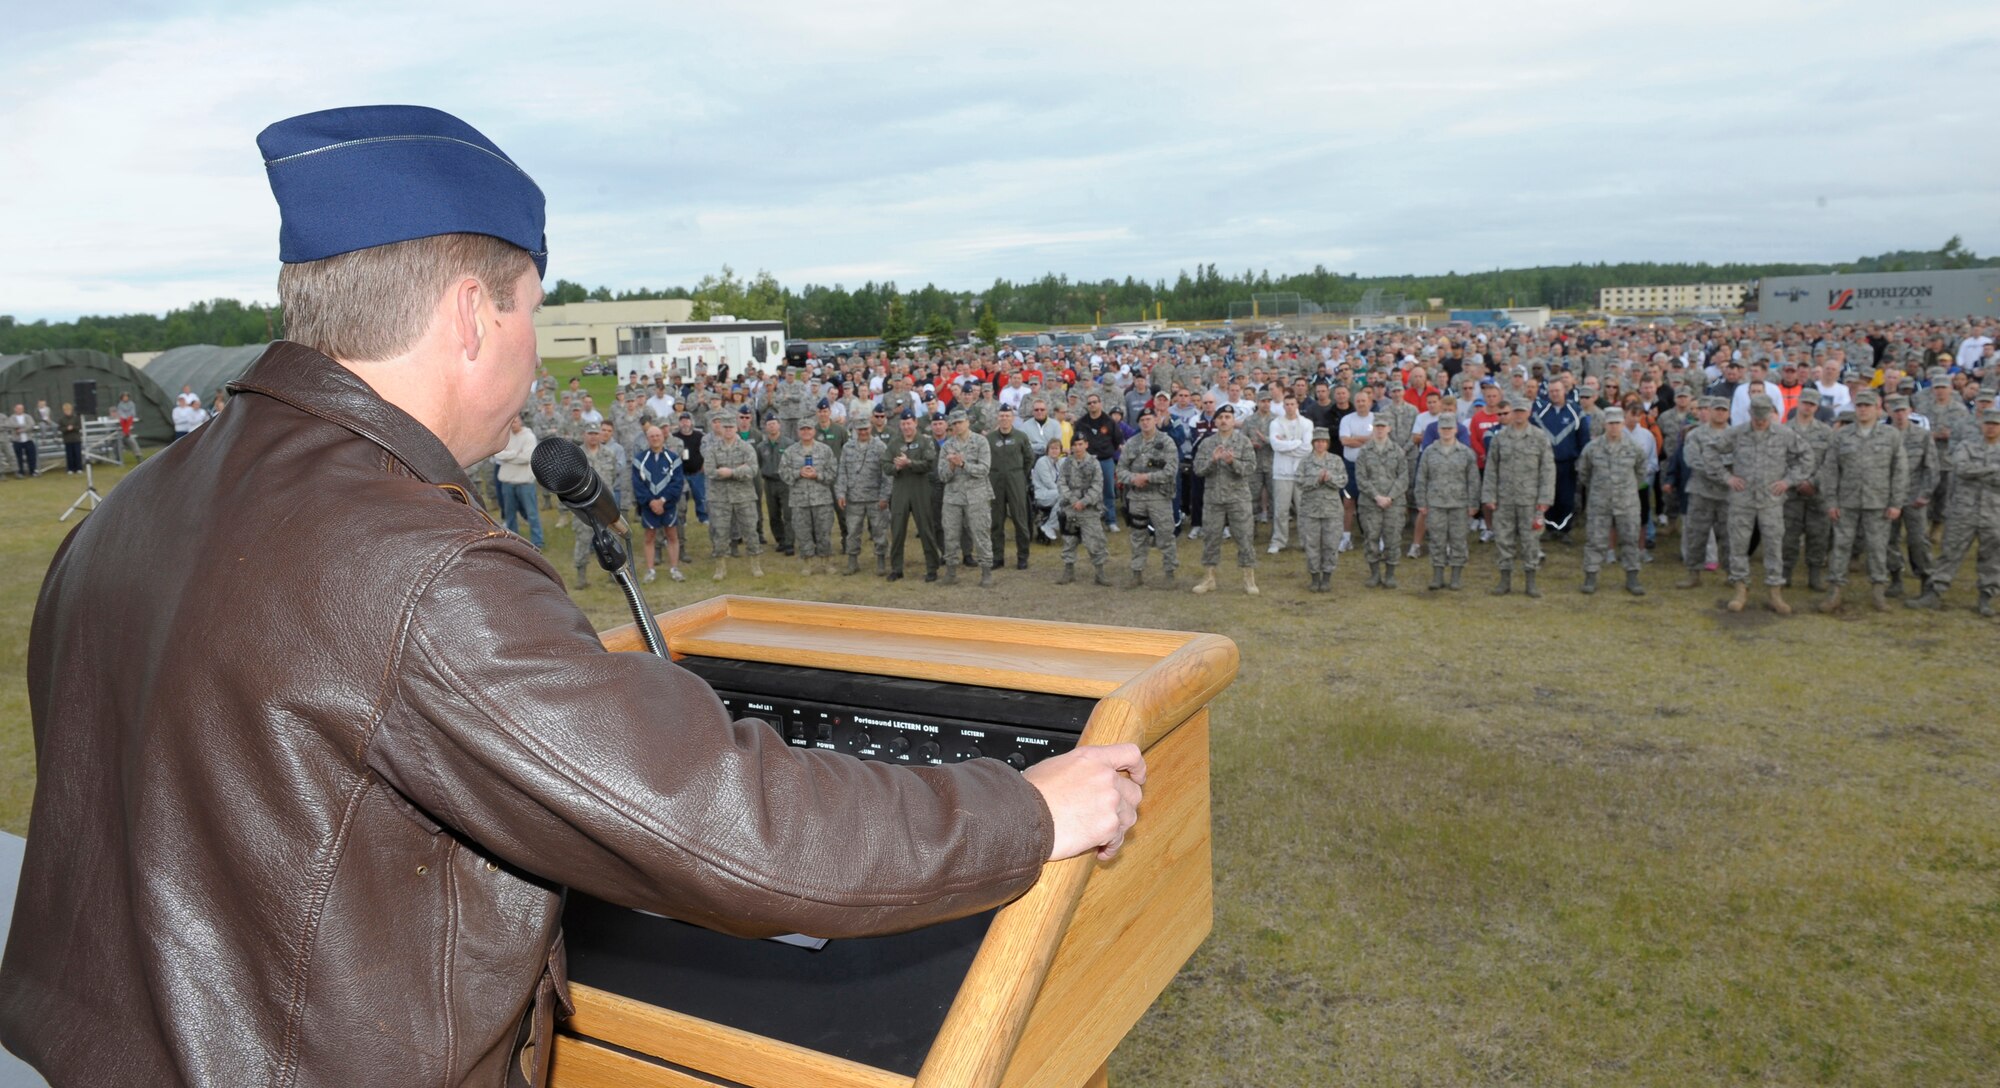 ELMENDORF AIR FORCE BASE, Alaska -- Col. Thomas Bergeson, 3rd Wing commander, speaks to hundreds of Arctic Warriors during the Operational Readiness Inspection outbrief June 12. During the outbrief, Bergeson announced Elmendorf's overall excellent rating during the 2009 ORI. (U.S. Air Force photo/Master Sgt. Keith Brown)